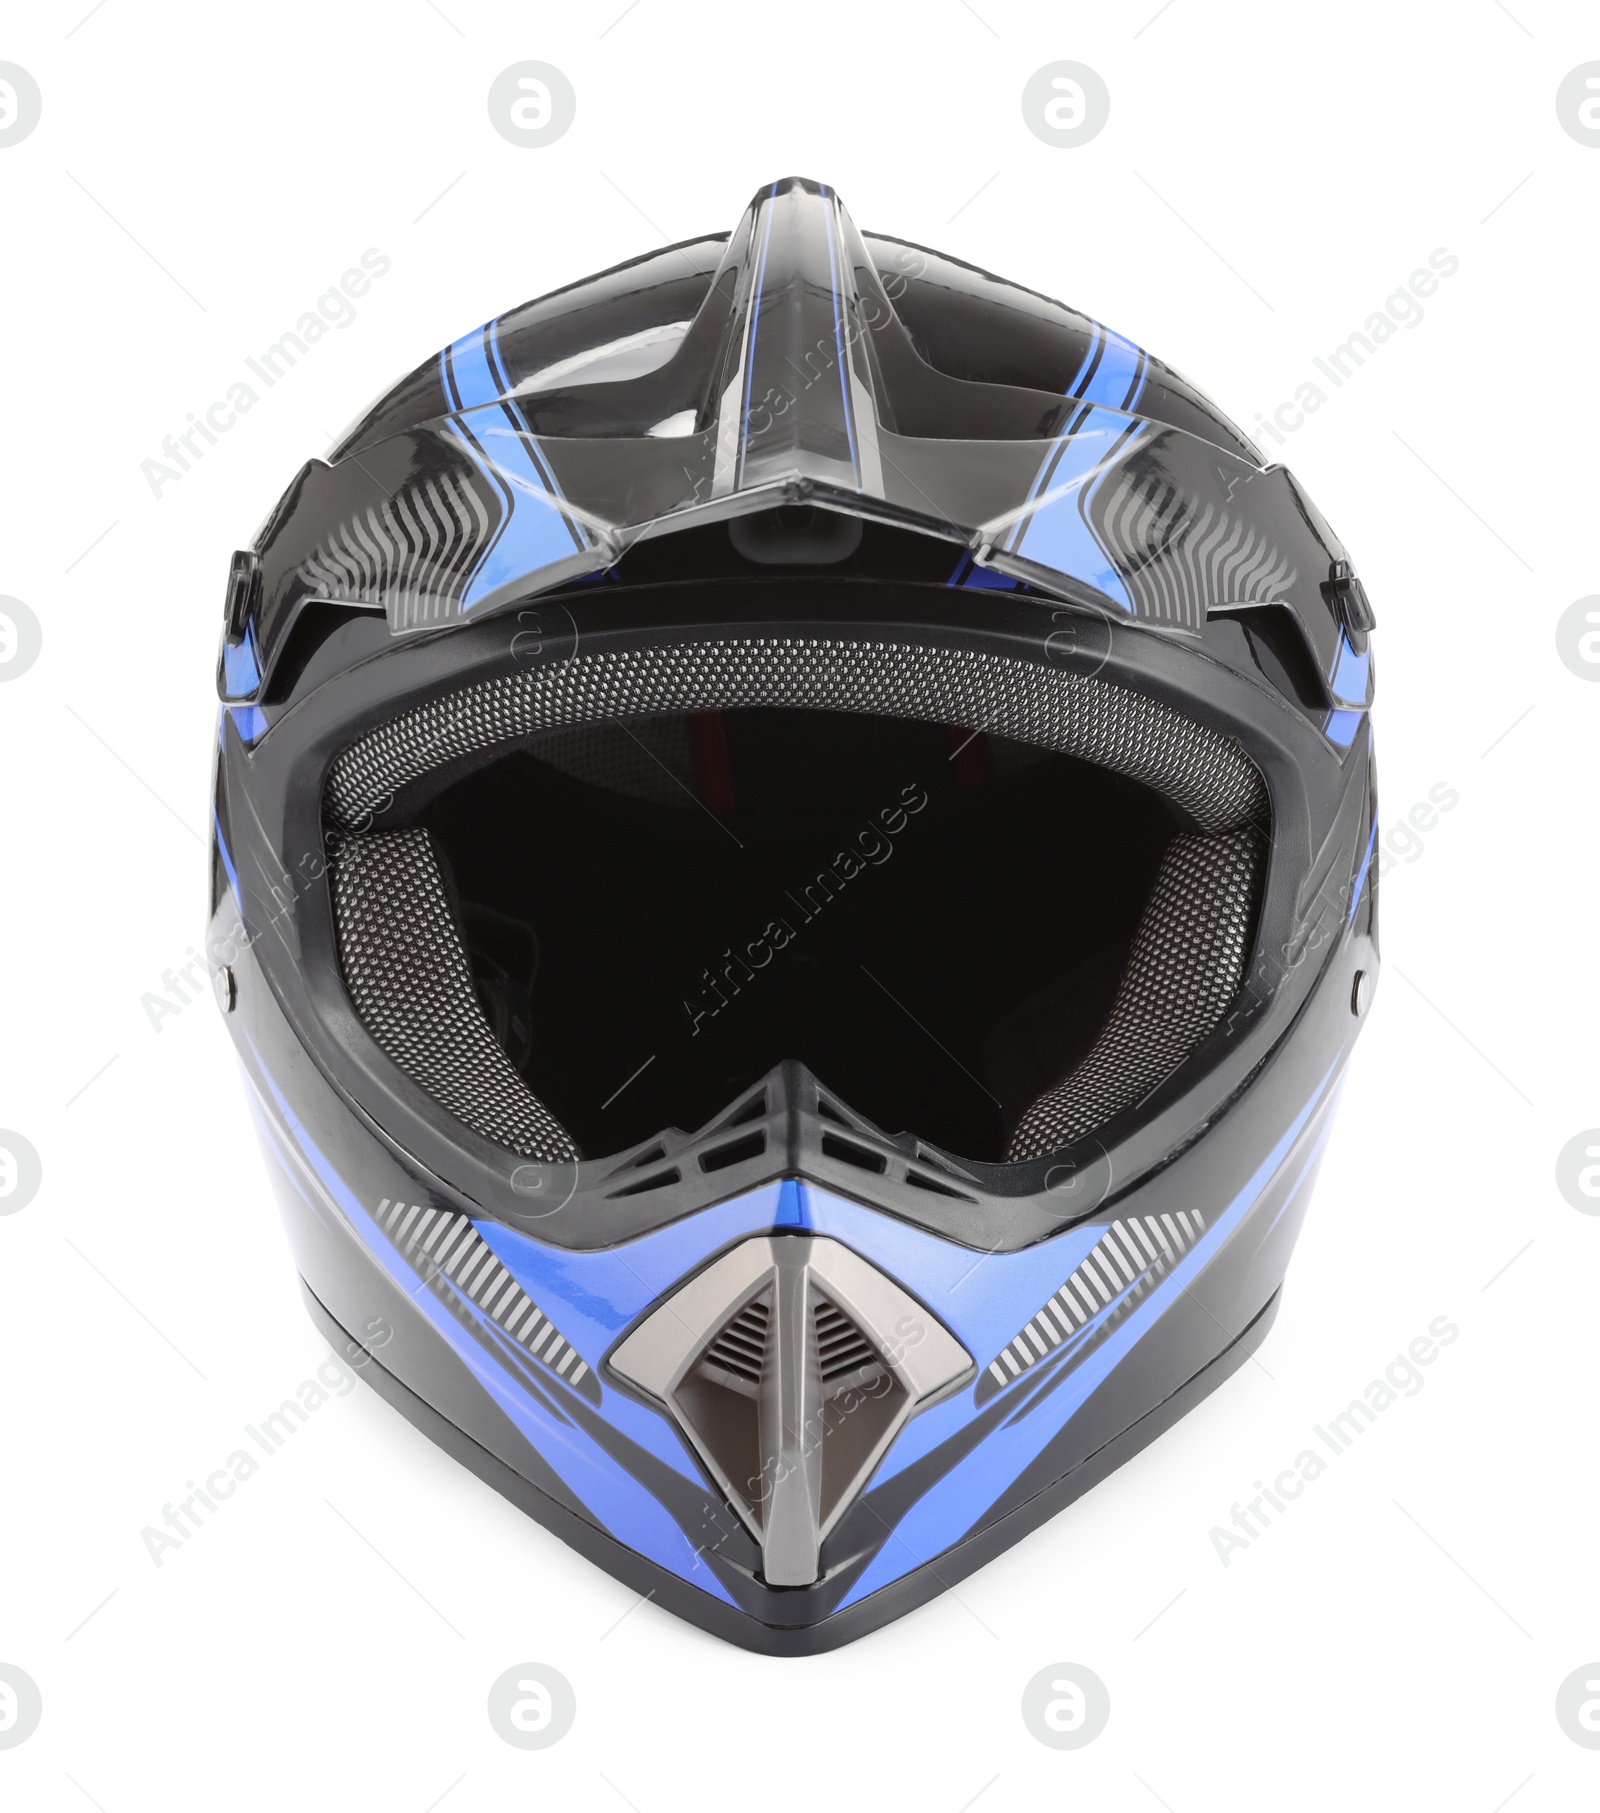 Photo of Modern motorcycle helmet with visor isolated on white